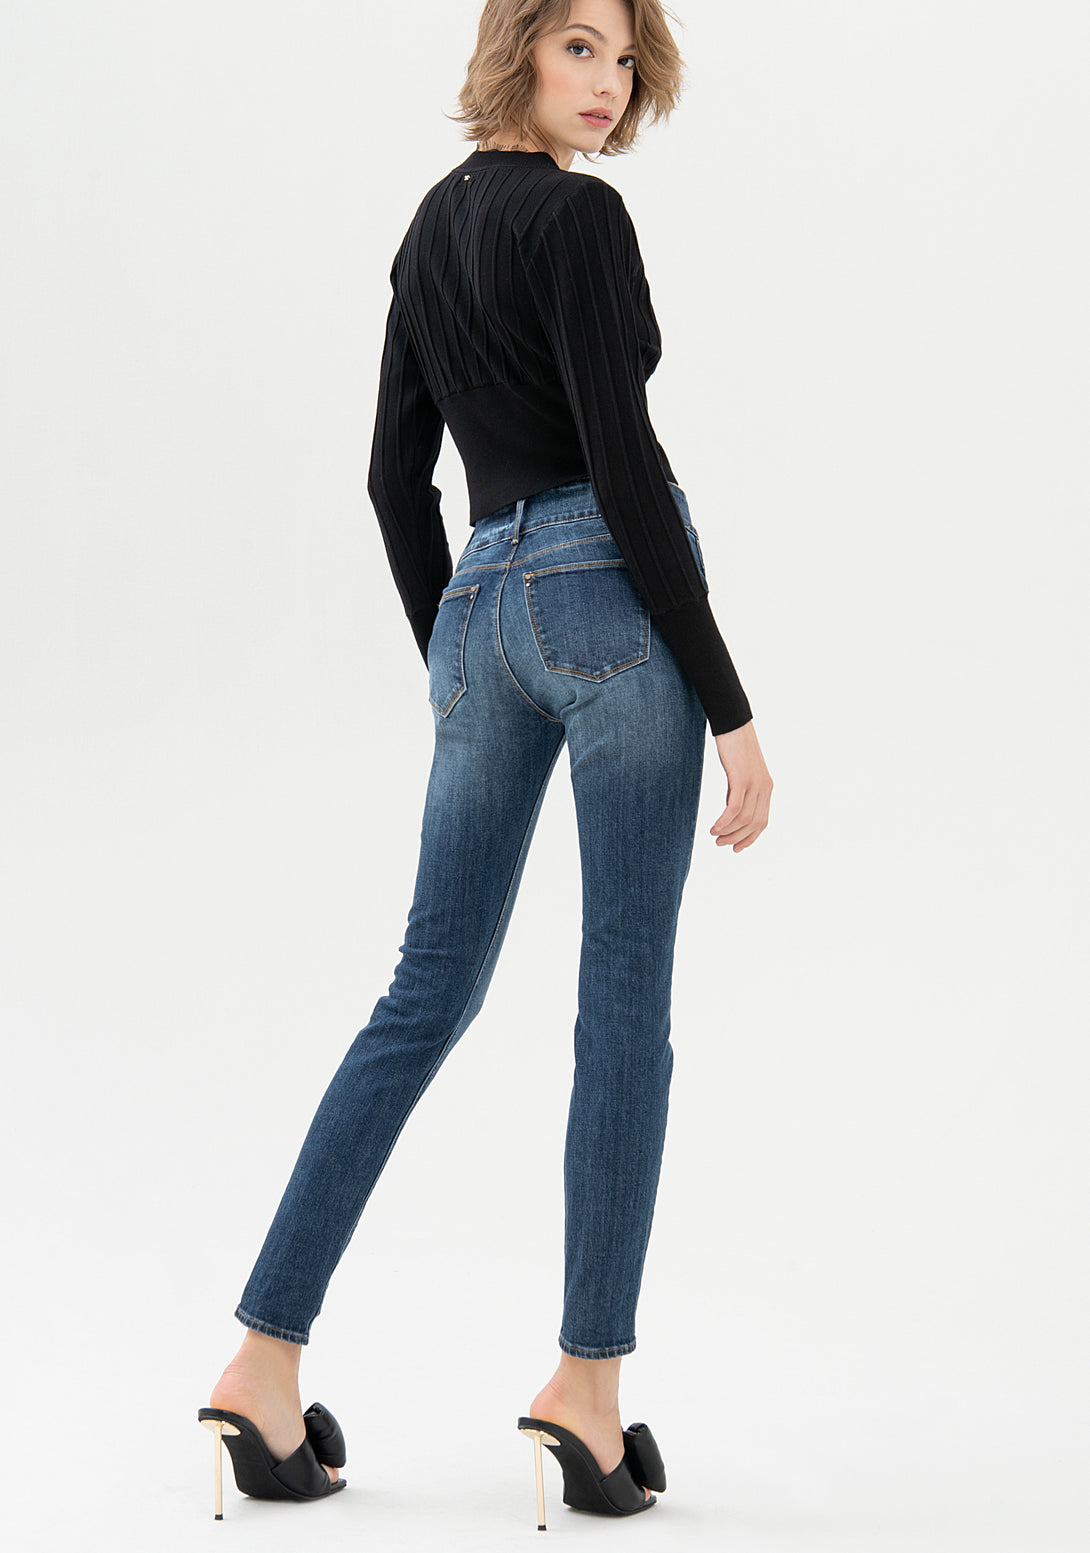 Leggings skinny fit denim with middle wash